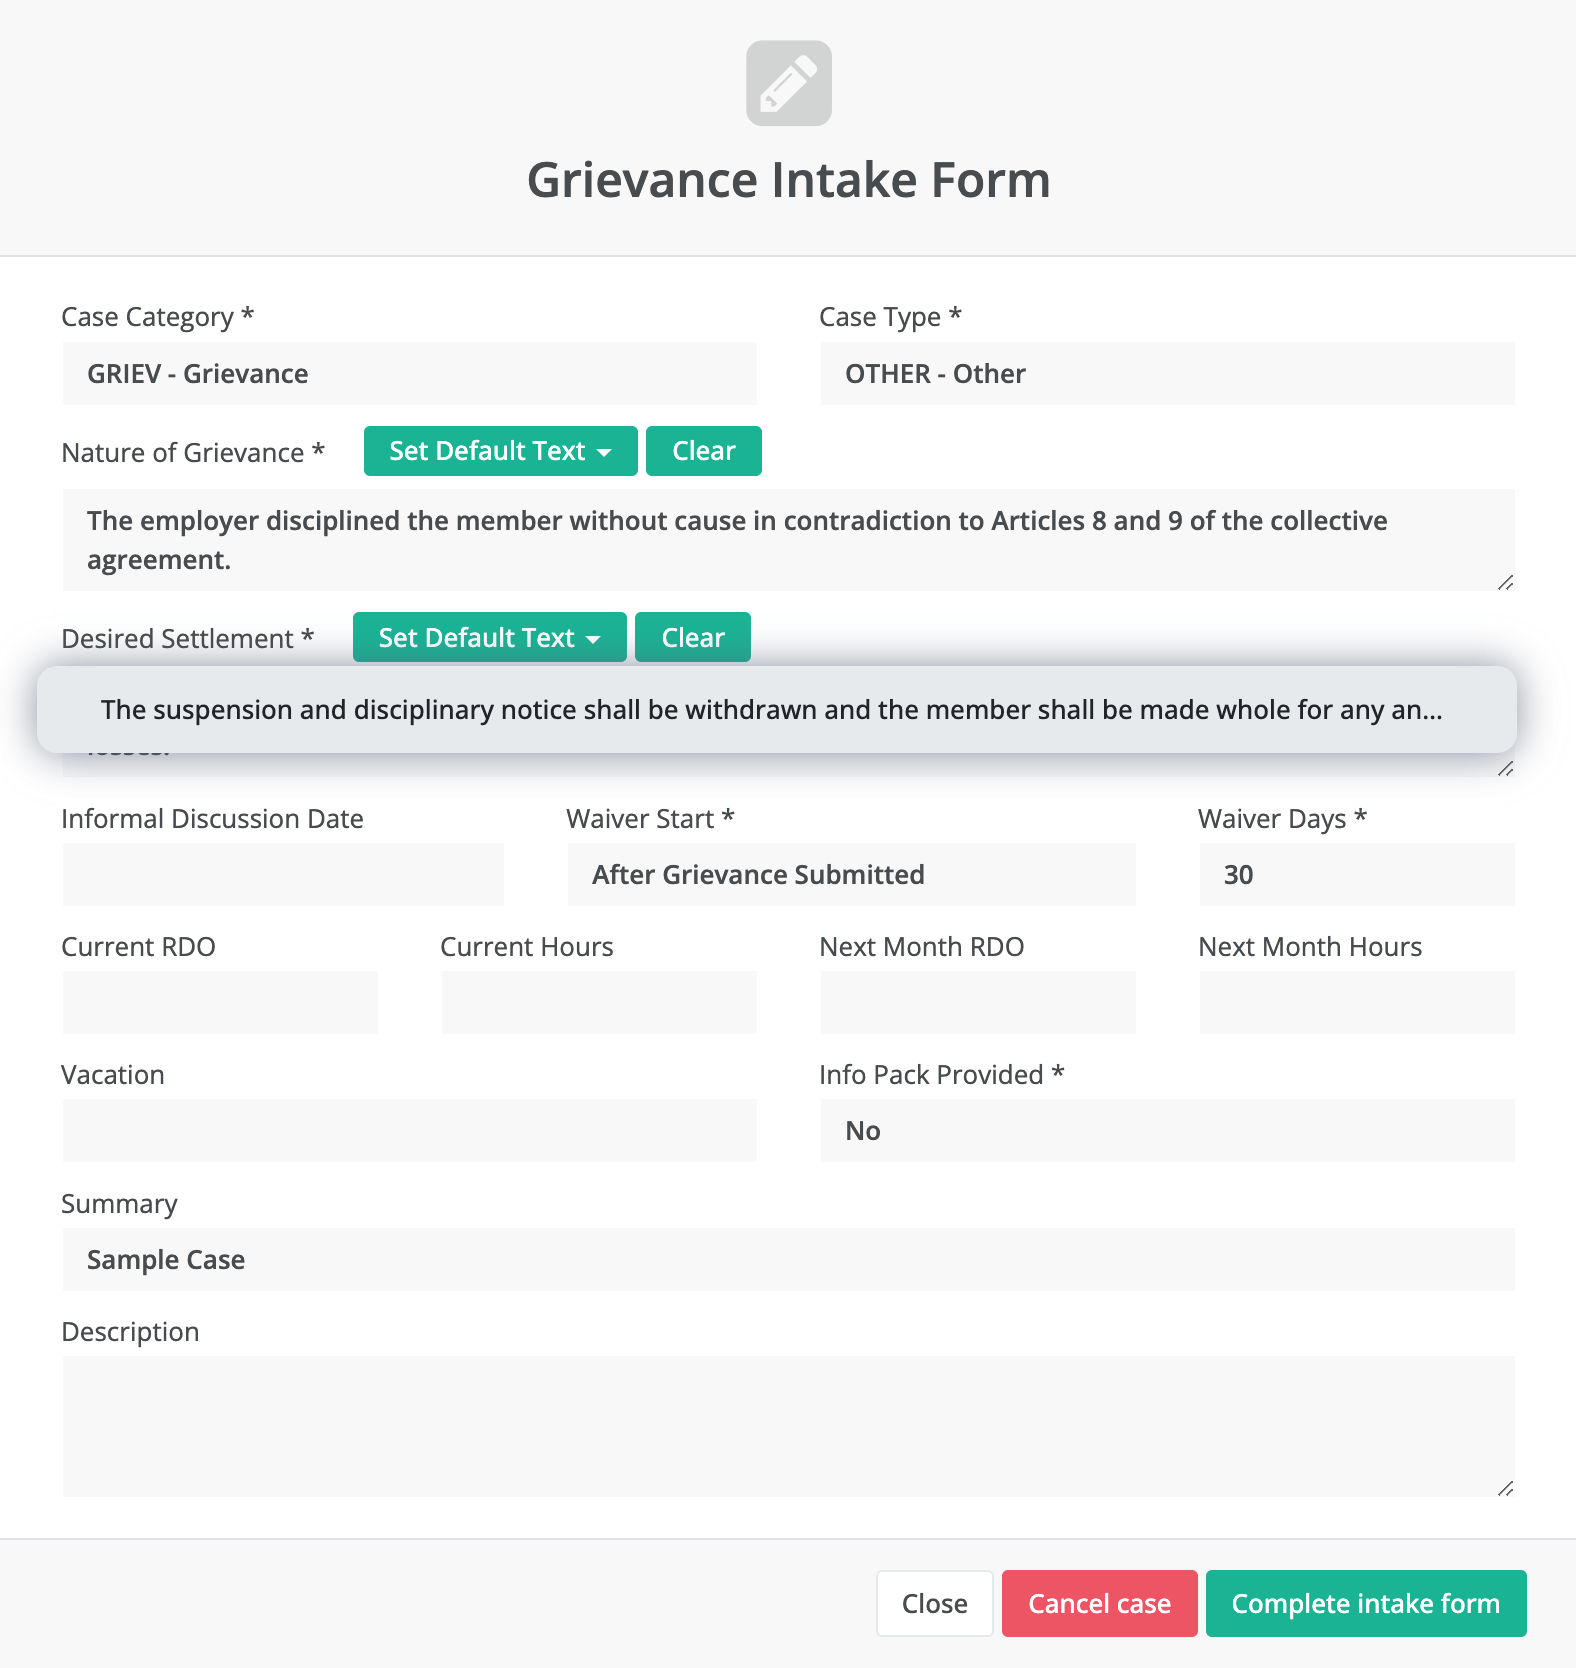 customisable default text and forms for grievance